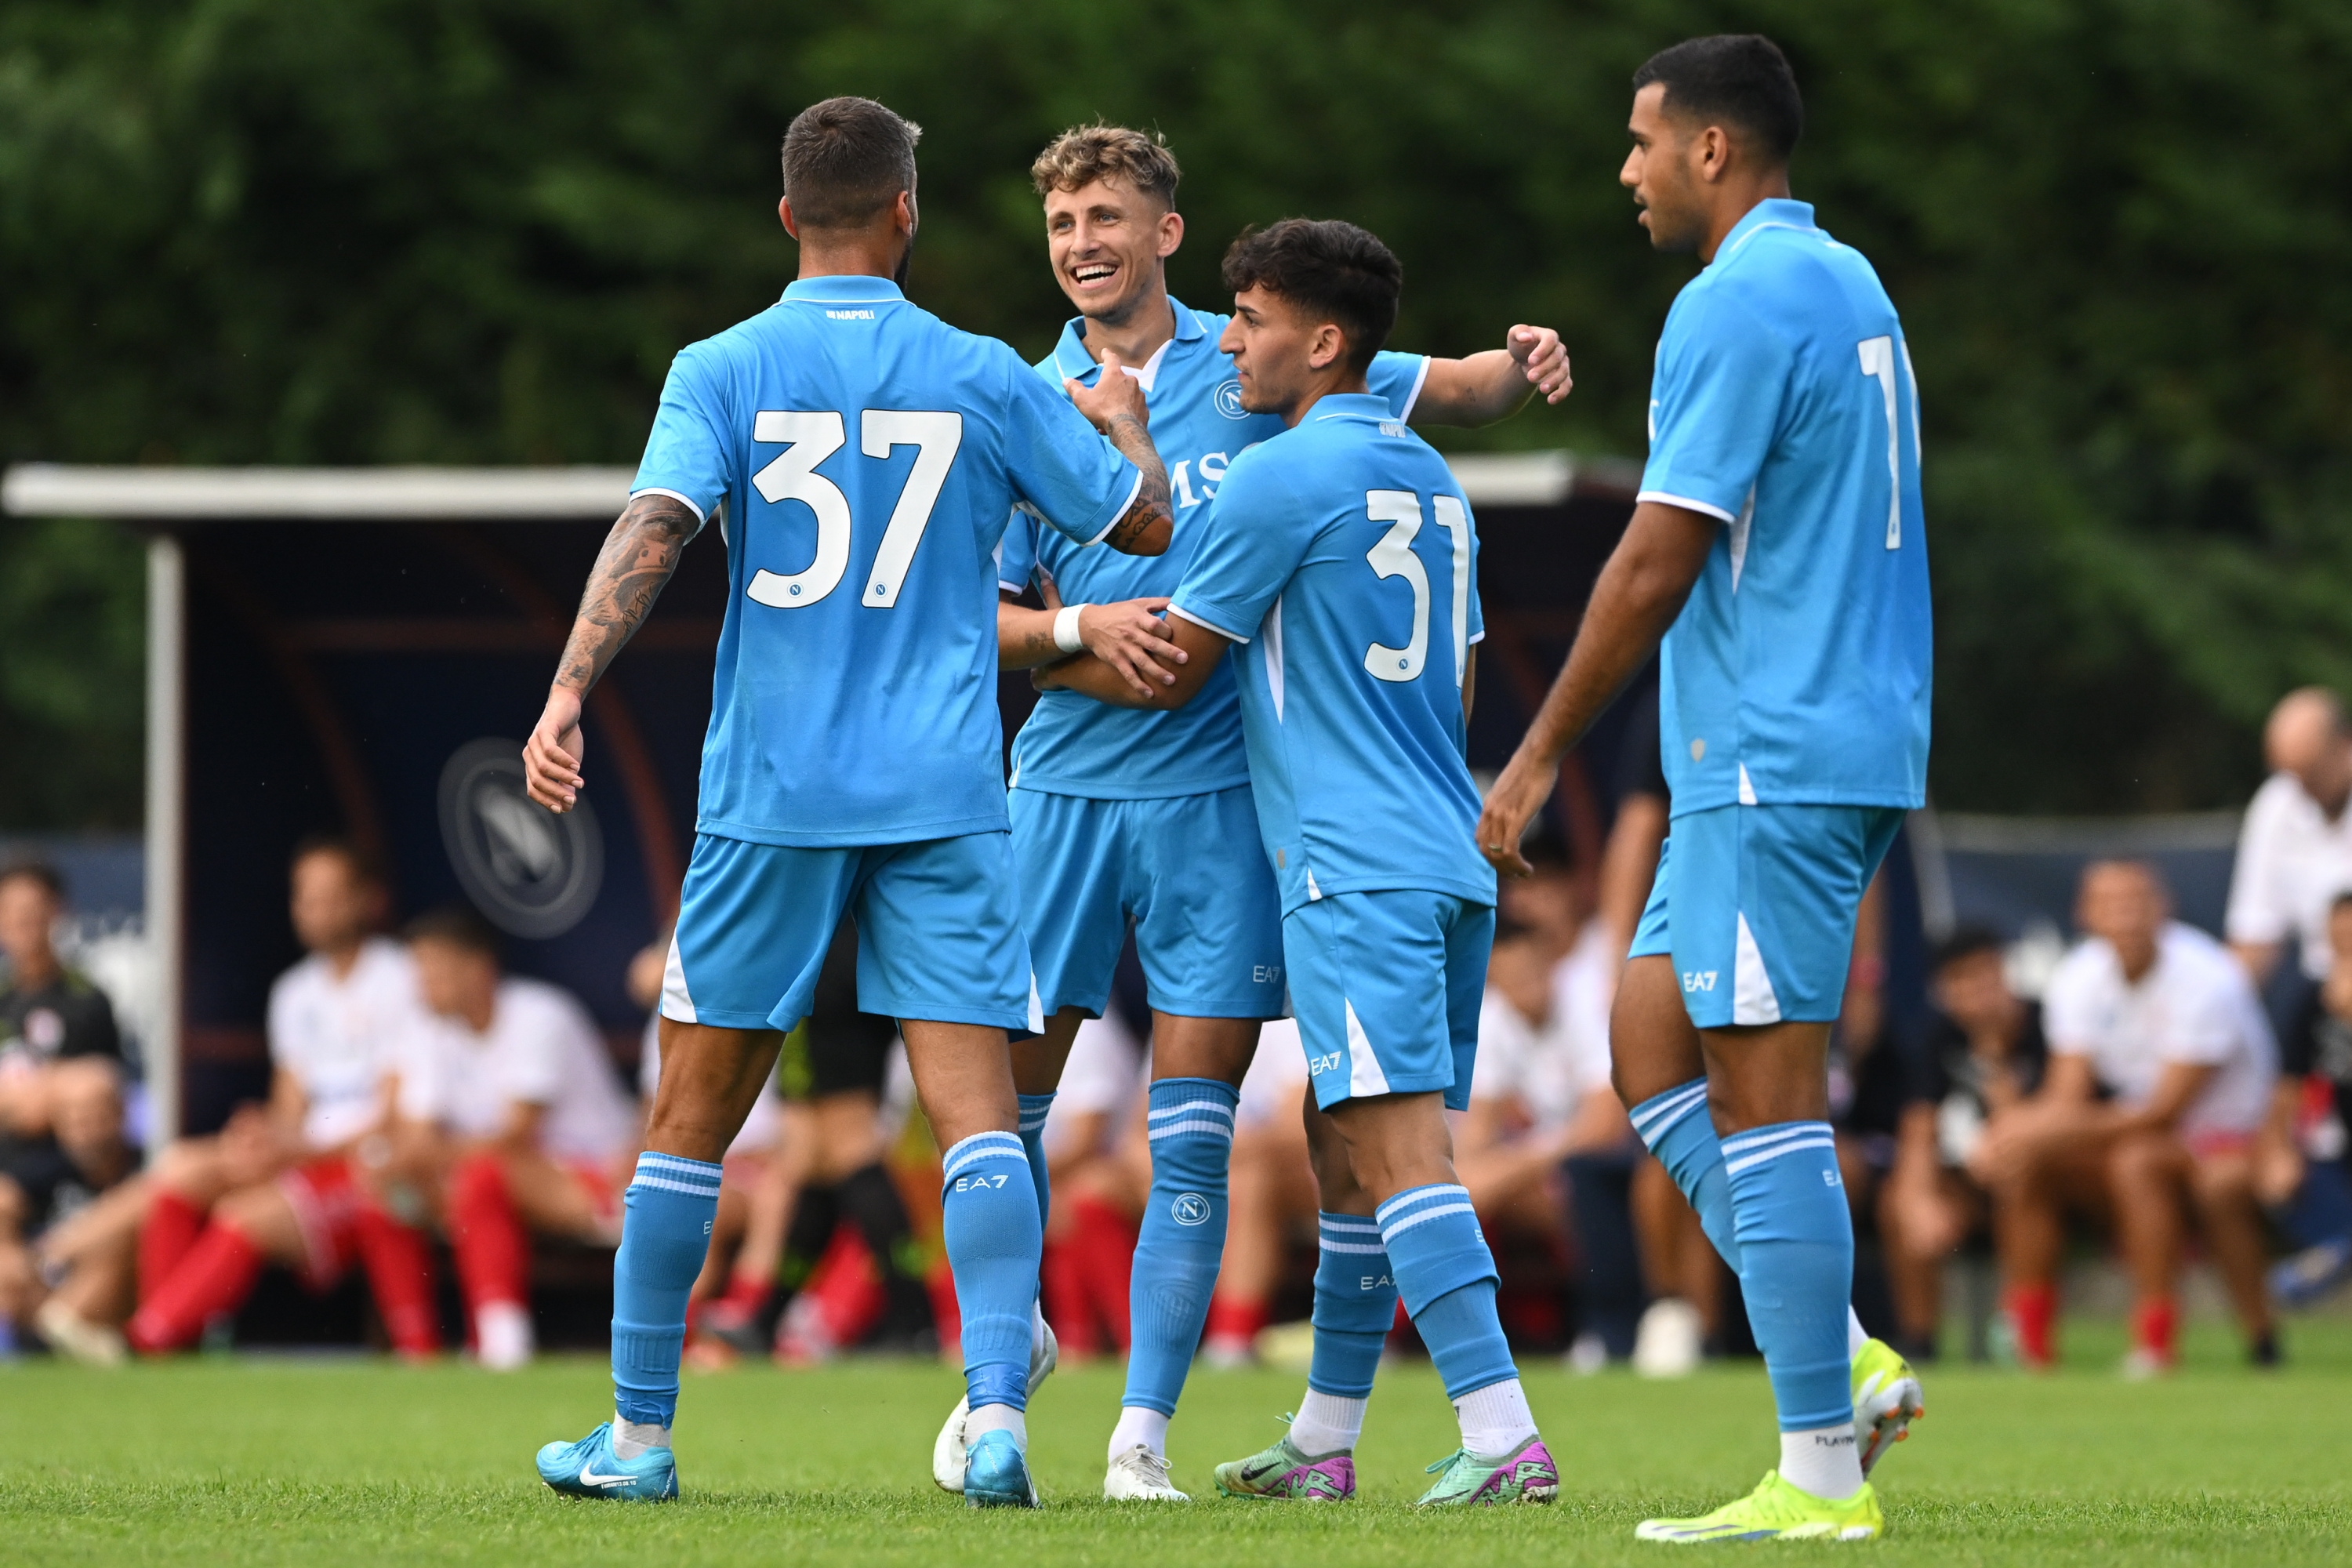 DIMARO, ITALY - JULY 20: SSC Napoli players Jesper Lindstrøm after scoring a goal during the pre season friendly game between SSC Napoli and Mantova at Dimaro Sport Center, on July 20 2024 in Dimaro, Italy. (Photo by SSC NAPOLI/SSC NAPOLI via Getty Images)